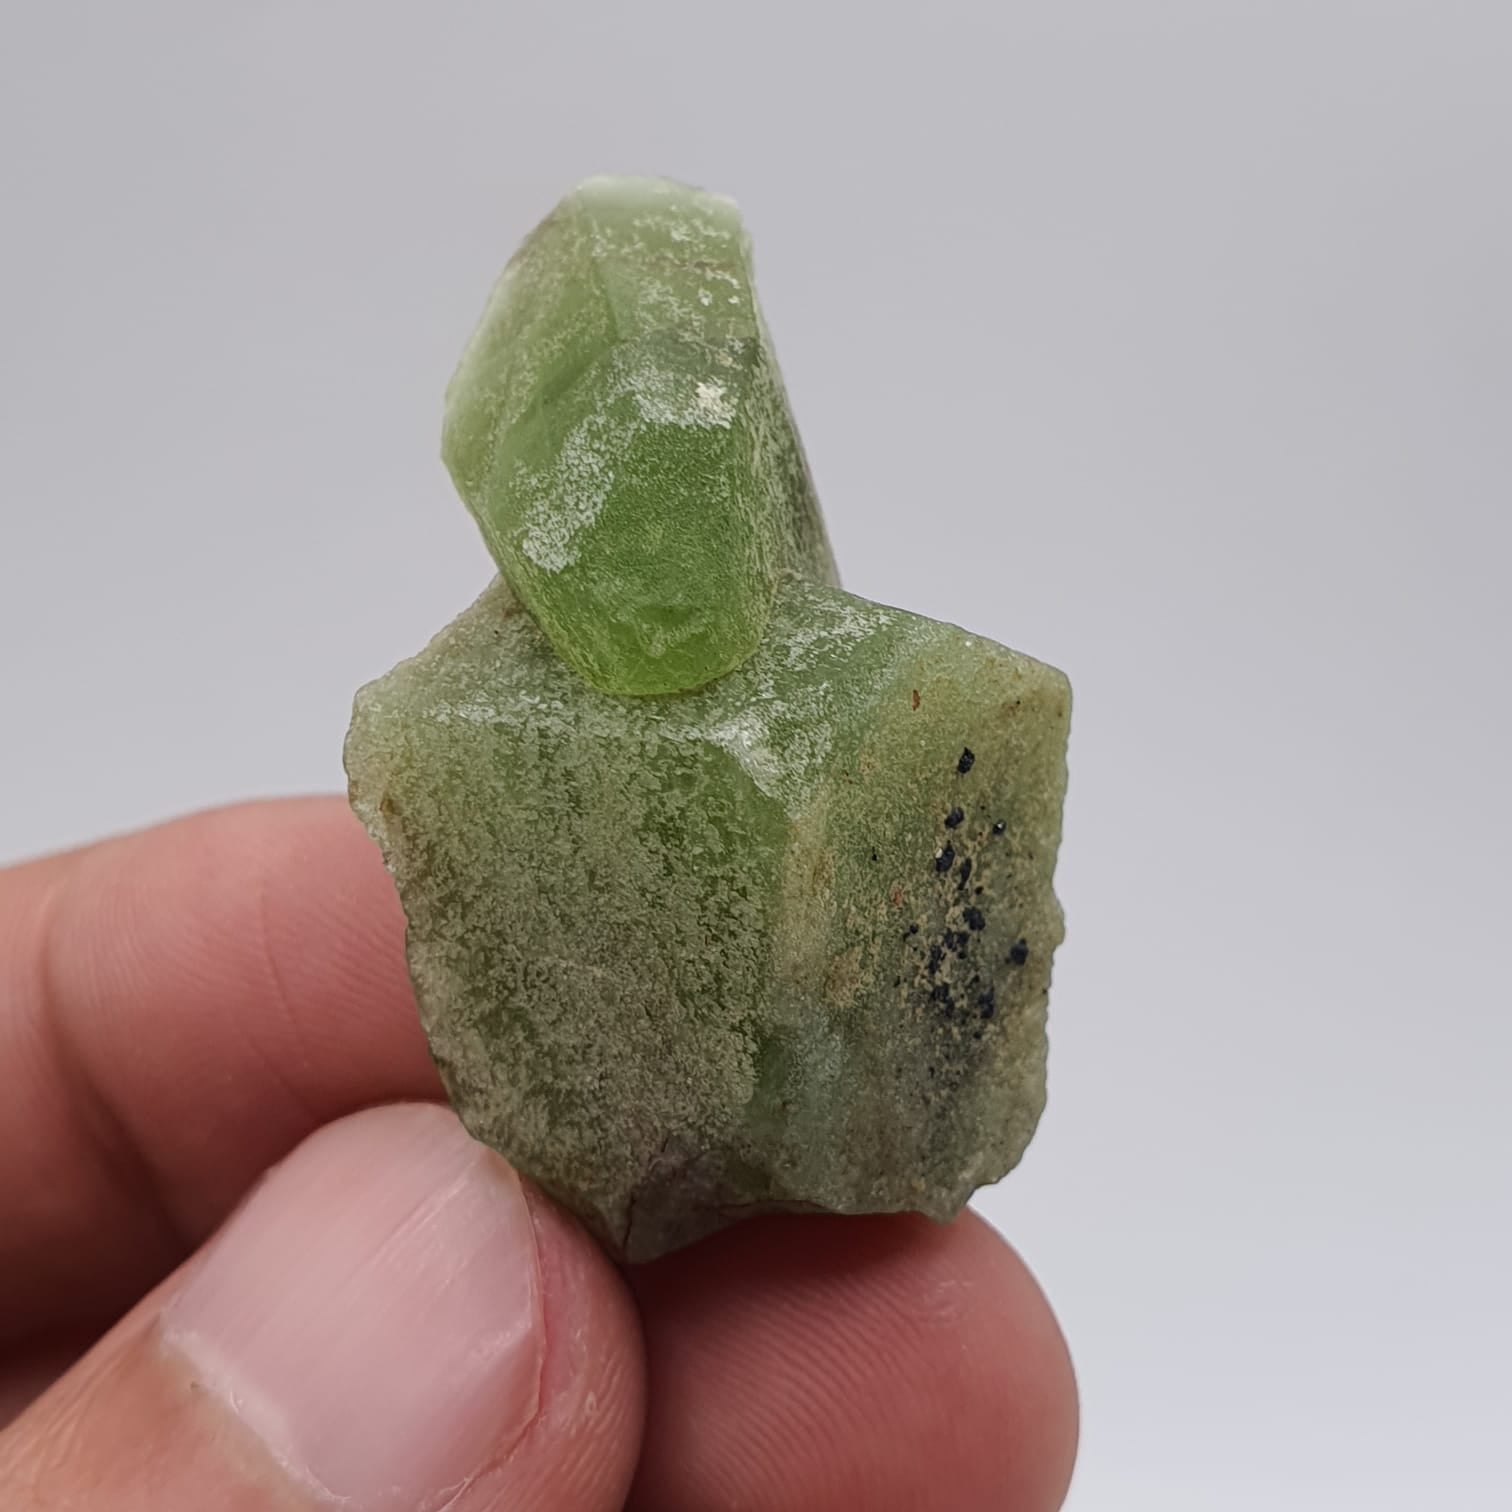 Lovely Apple-Green Peridot With Magnetite Crystals